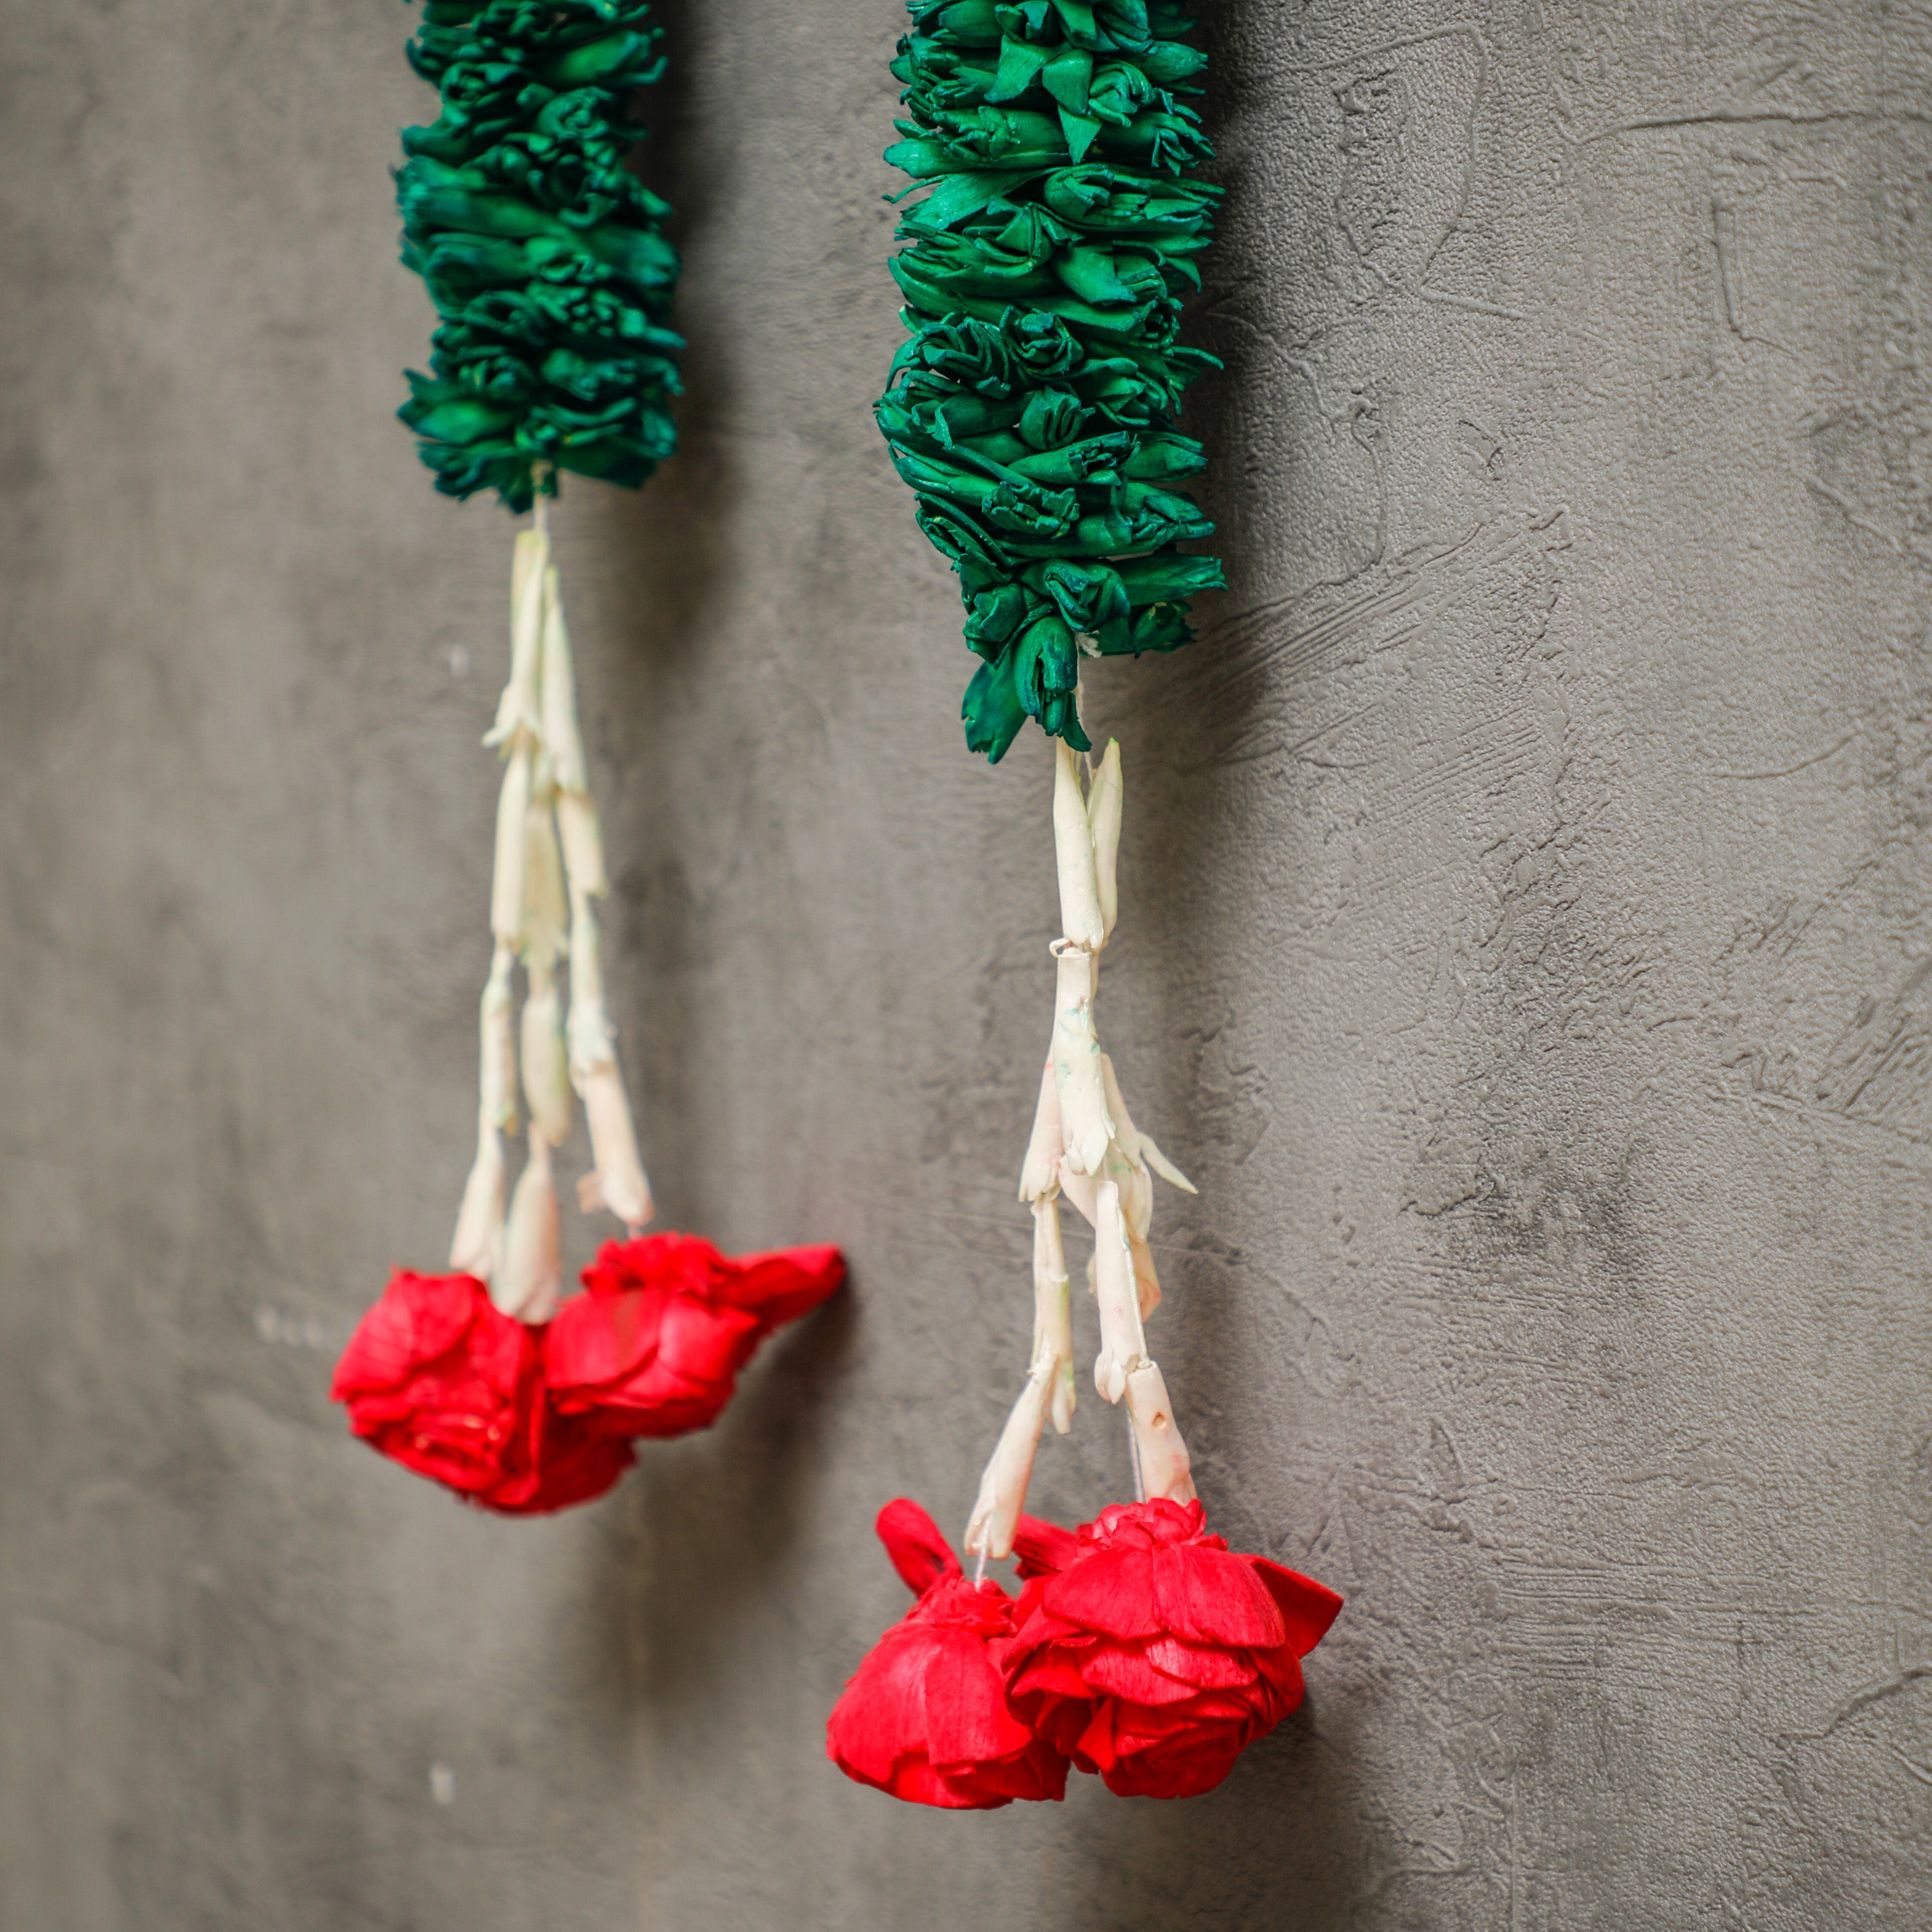 This eco-conscious hanging brings a sense of harmony to your pooja room, doors, or any festive space.